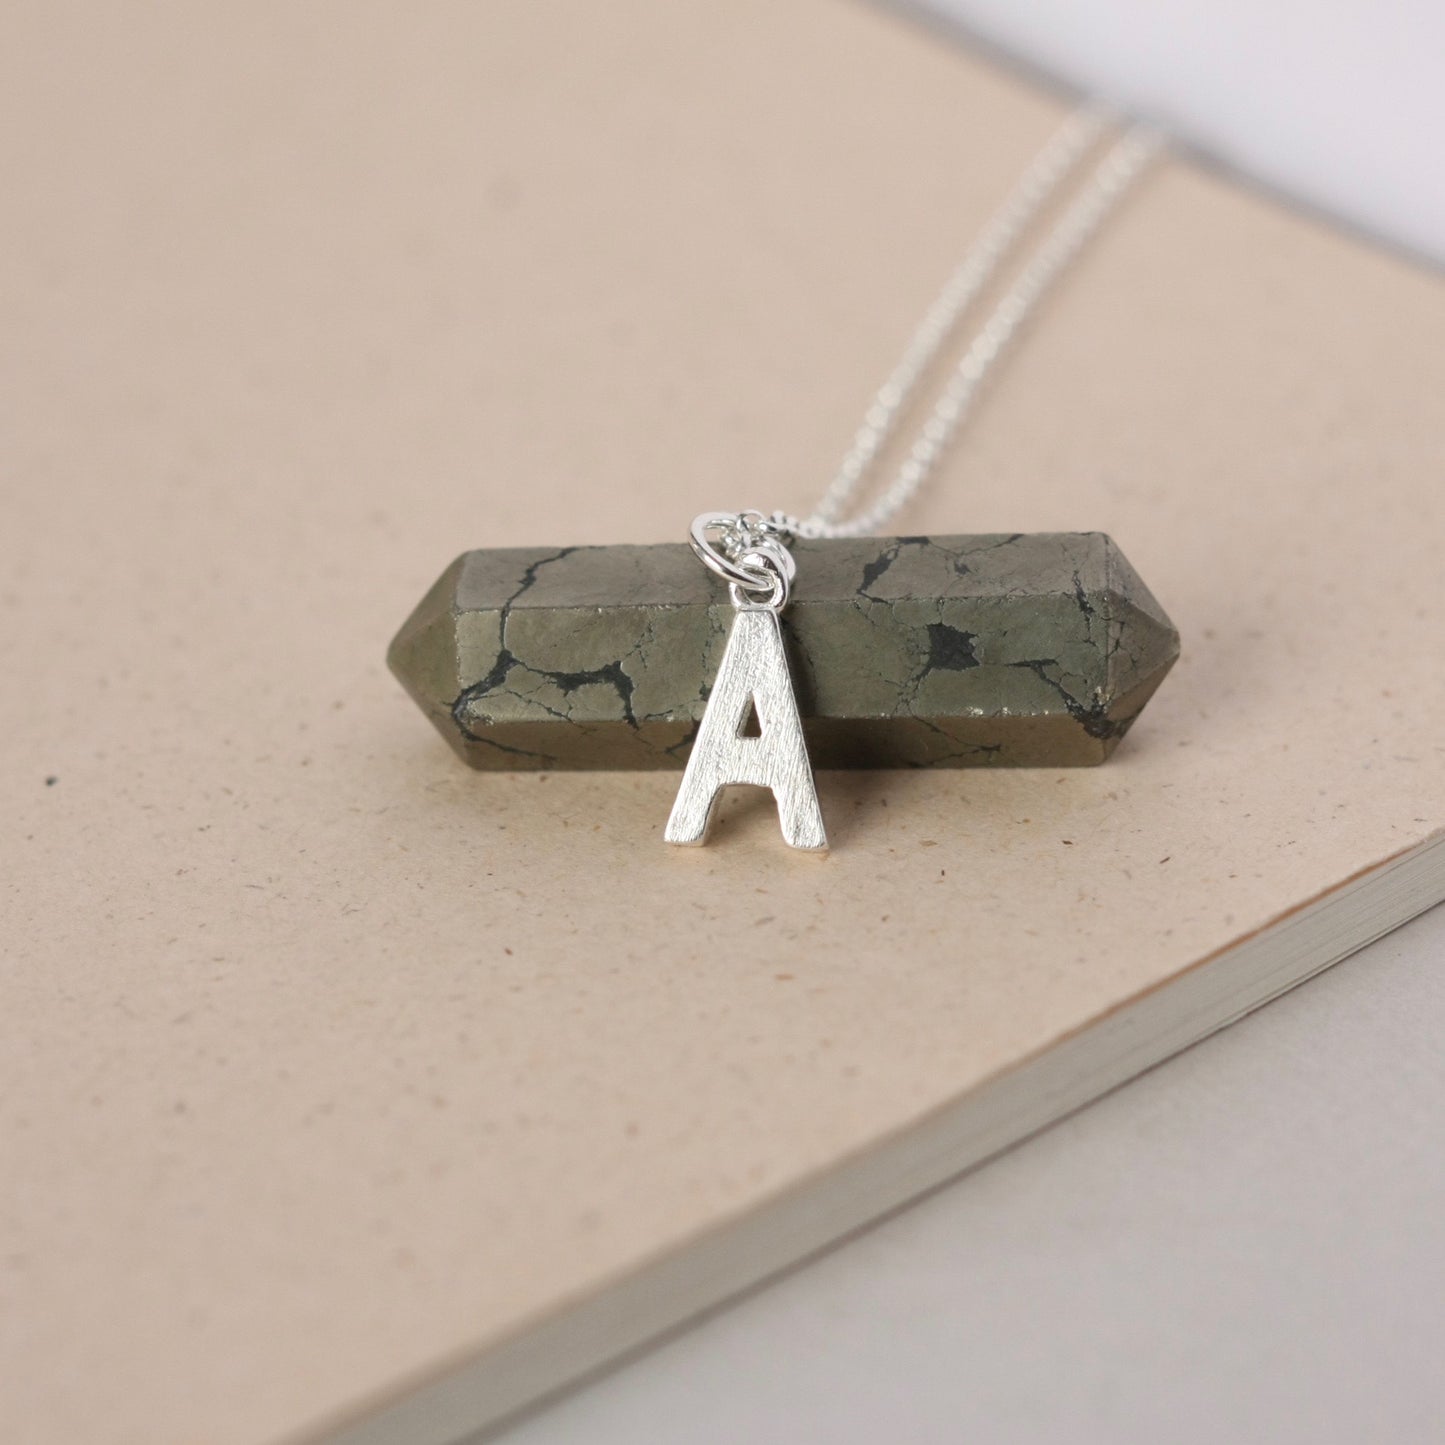 Personalized Sterling Silver Initial Charm Necklace